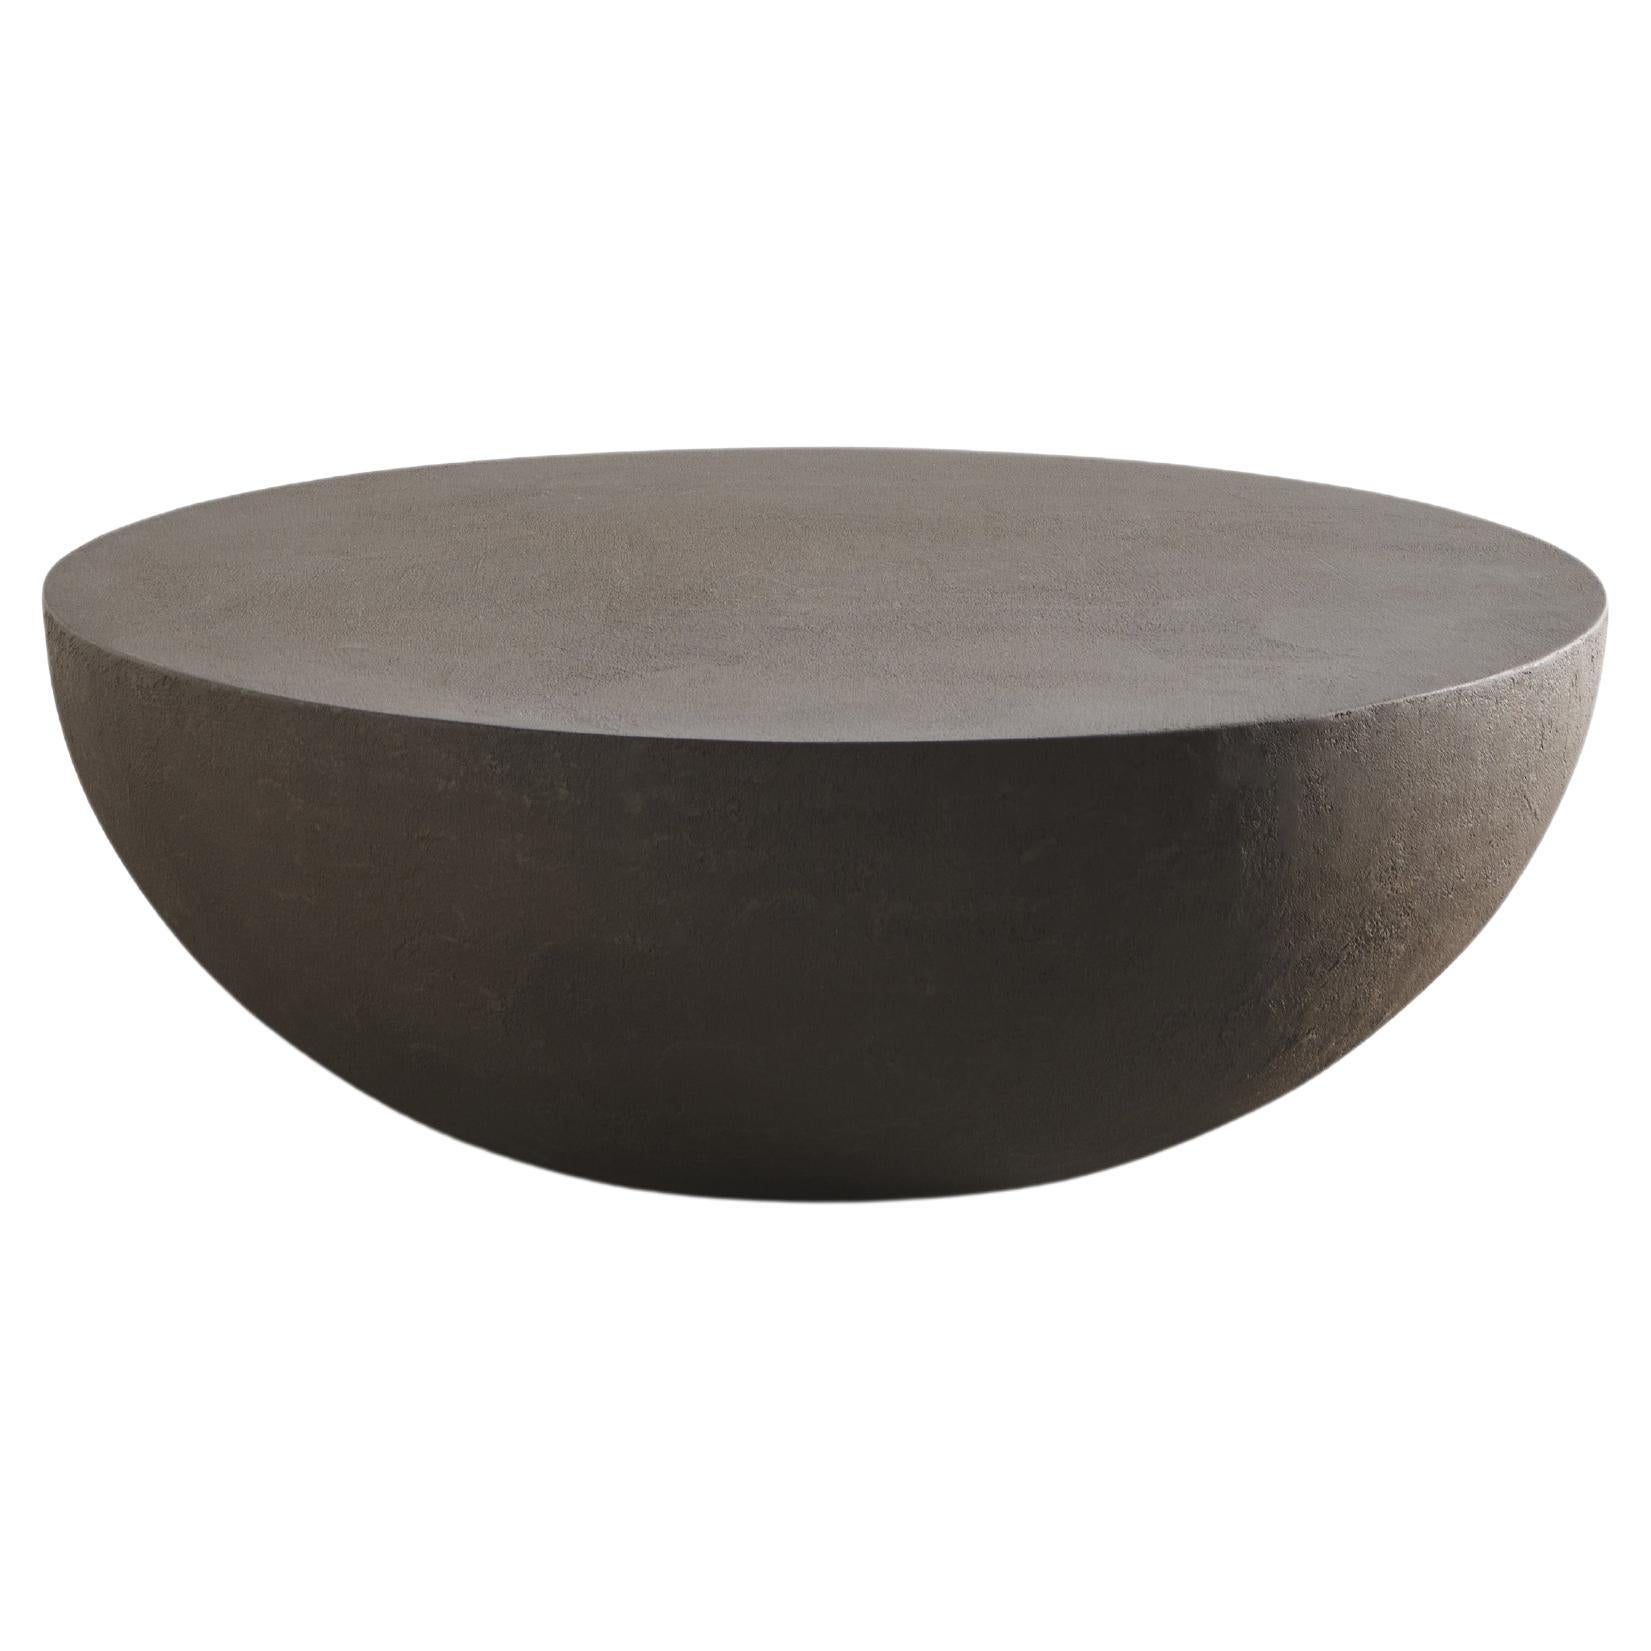 From the Japanese equilibrium, stability, Heiko calls to mind the shape of the tables, defined by curved lines, with a rounded base which seems to float on the surfaces. Simple geometries and full volumes are combined and superimposed, giving life